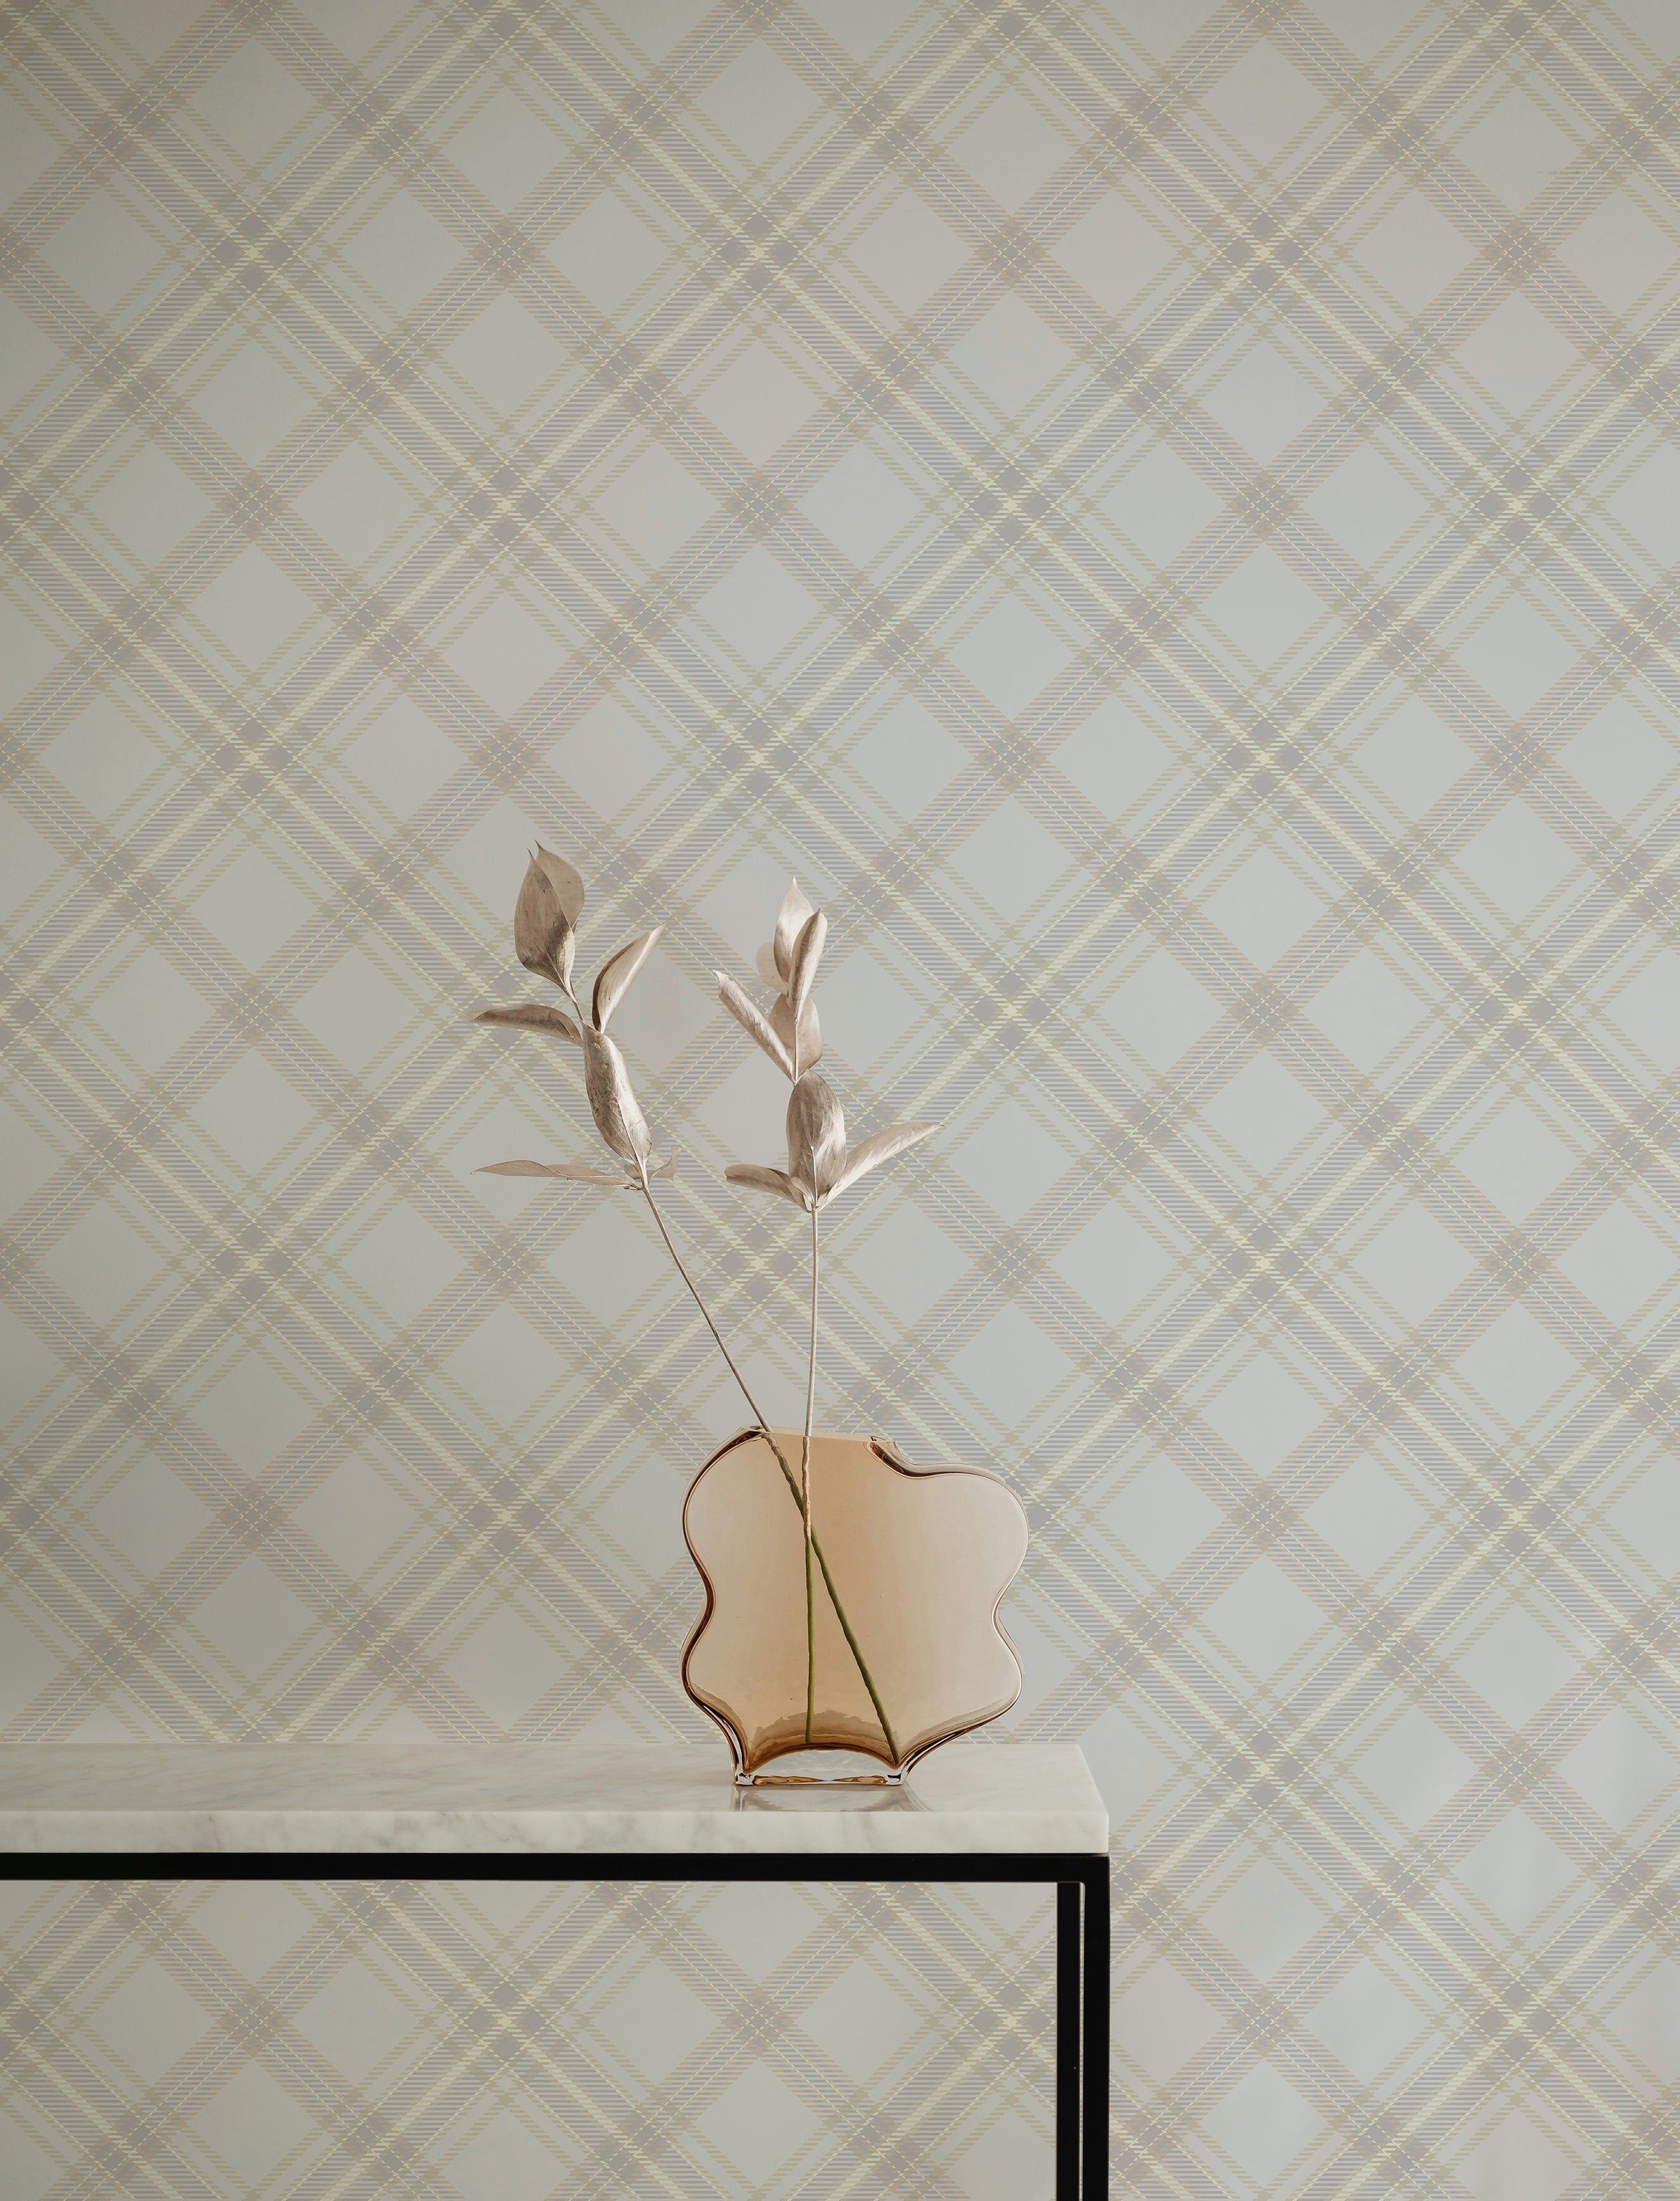 Royal Tartan Plaid Wallpaper featuring a sophisticated crisscross pattern in soft beige and cream tones, creating a timeless and elegant look in any room. A modern vase with abstract flowers complements the wallpaper on a minimalist table.